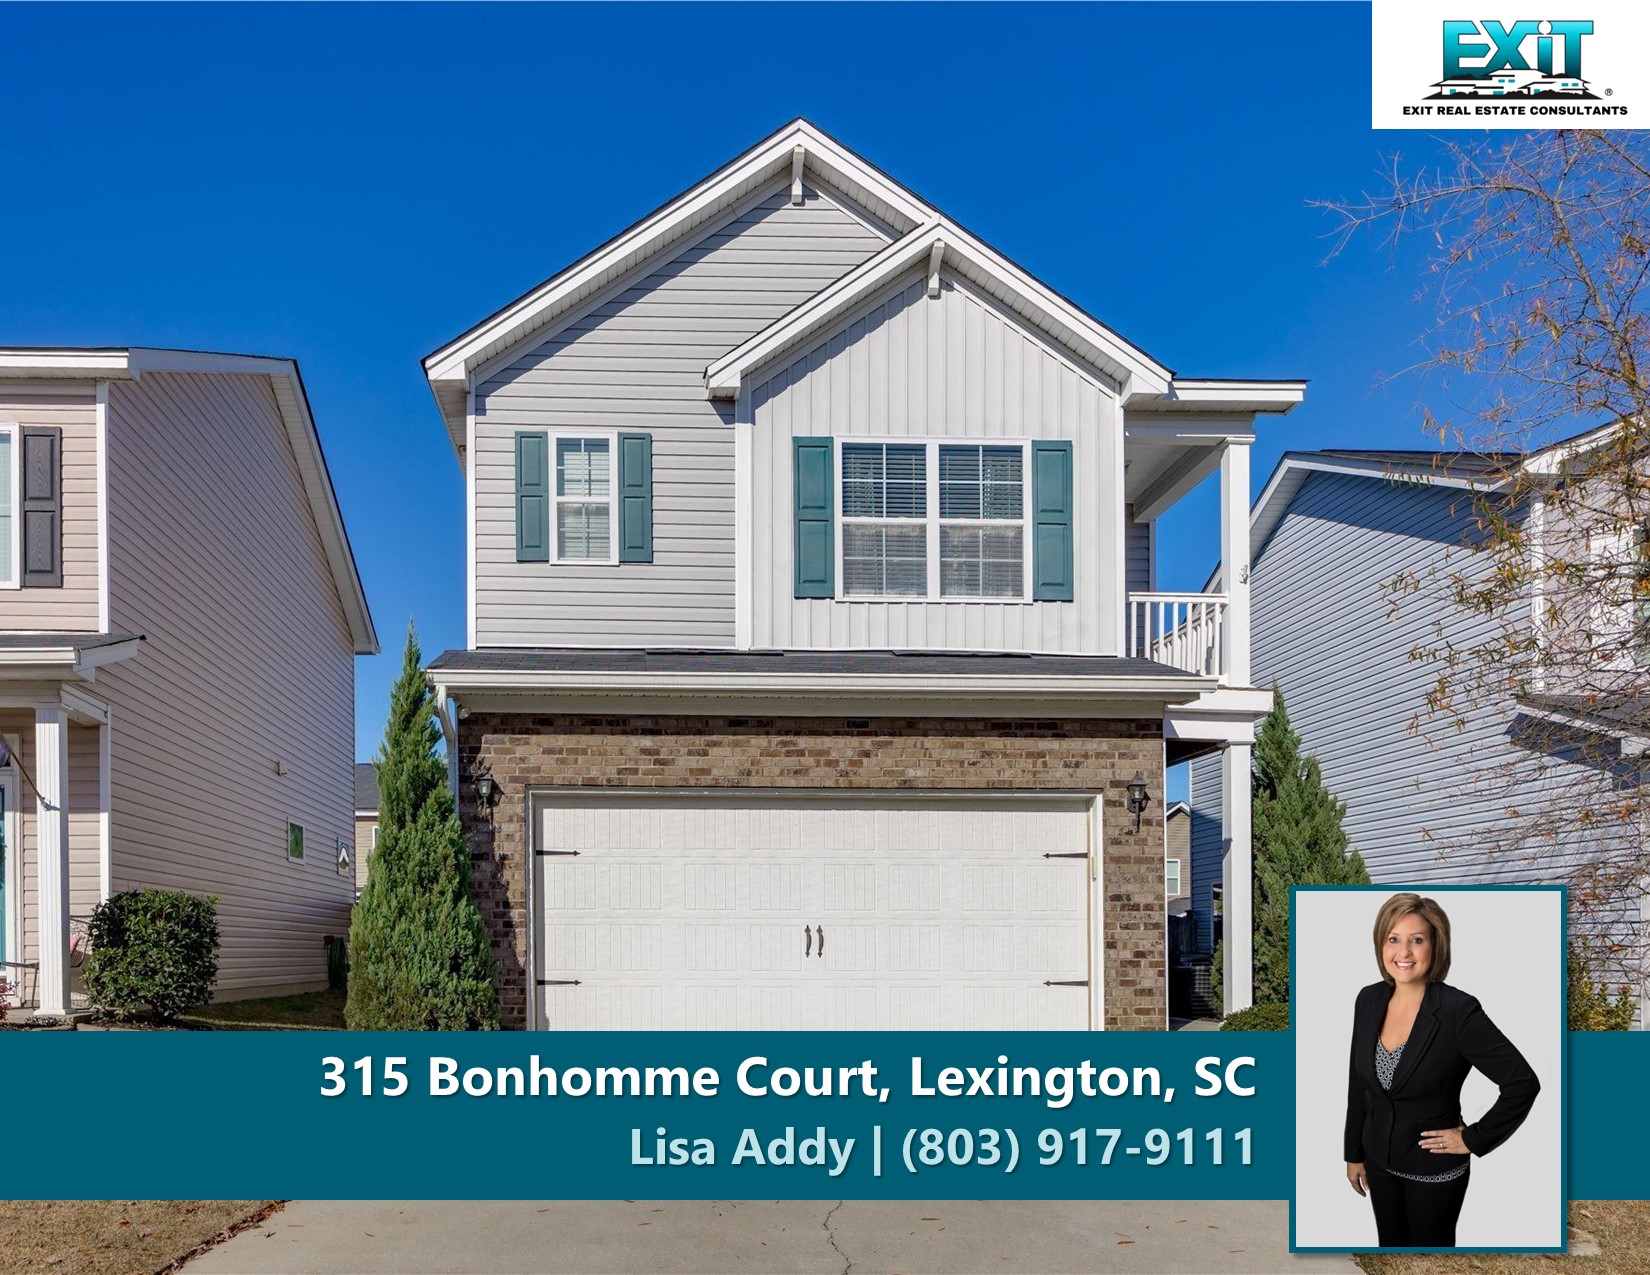 Just listed in Bonhomme Green - Lexington